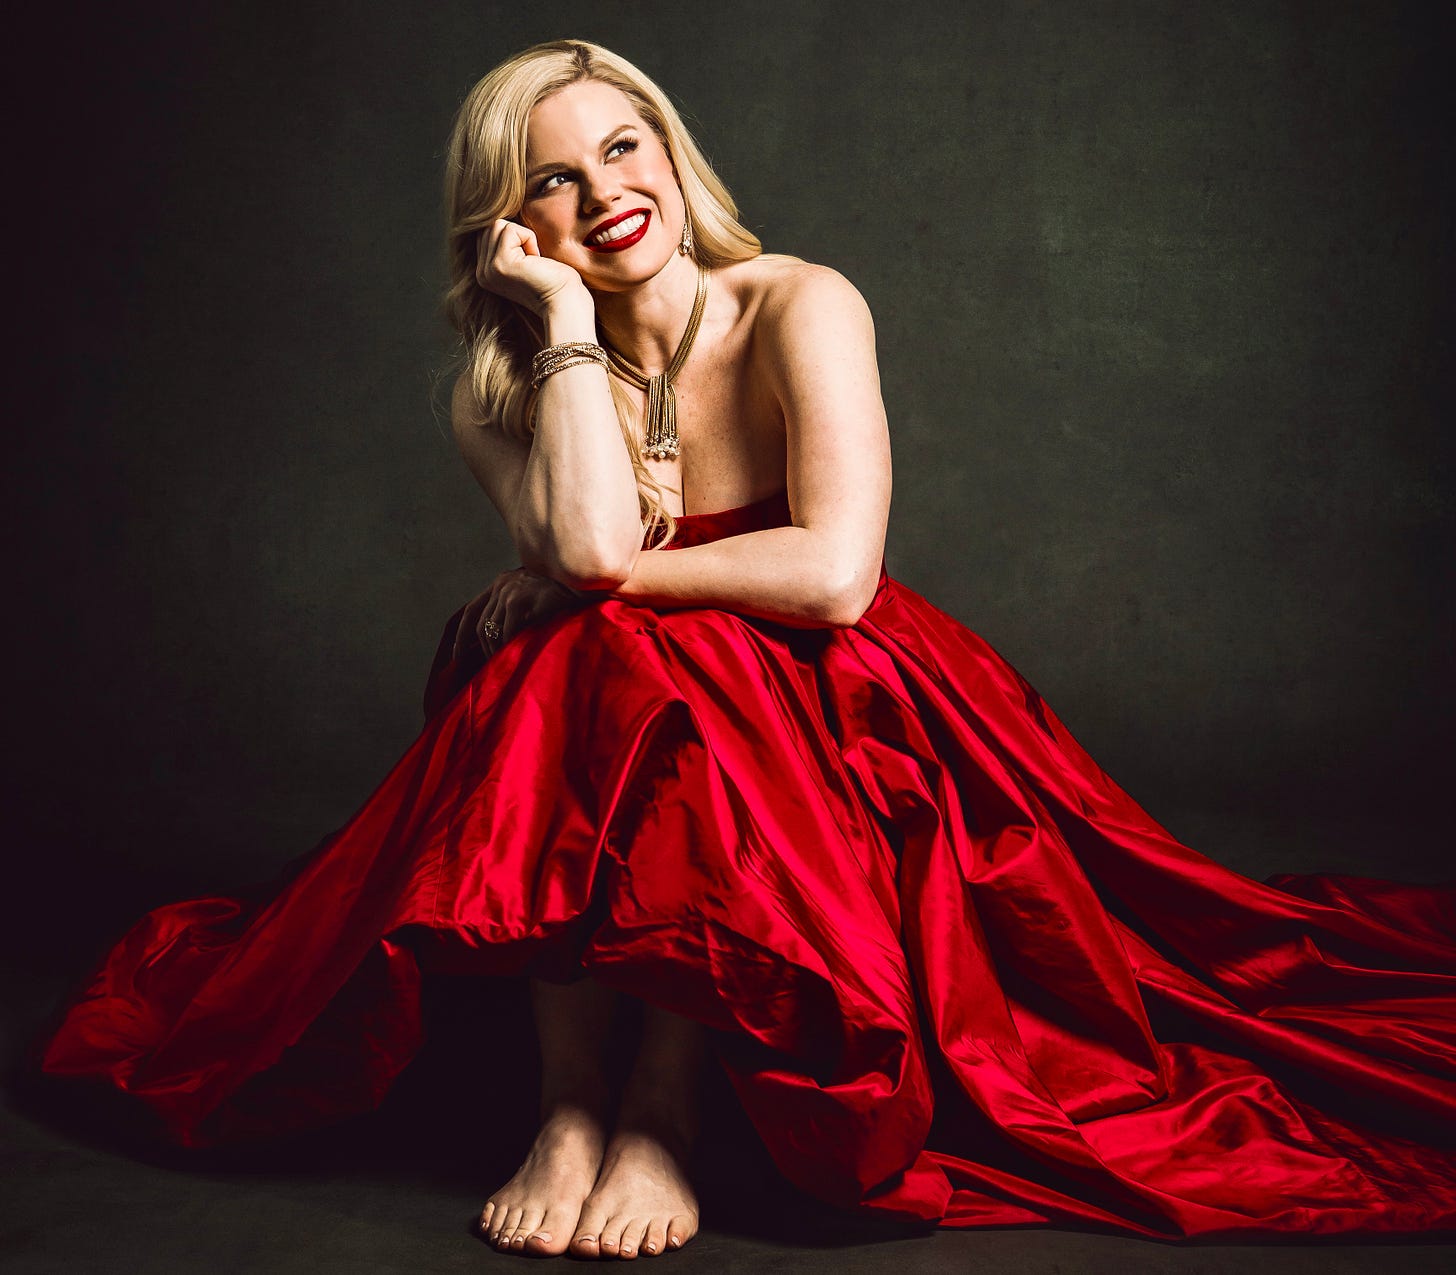 A smiling blonde woman in bare feet and a red satin dress